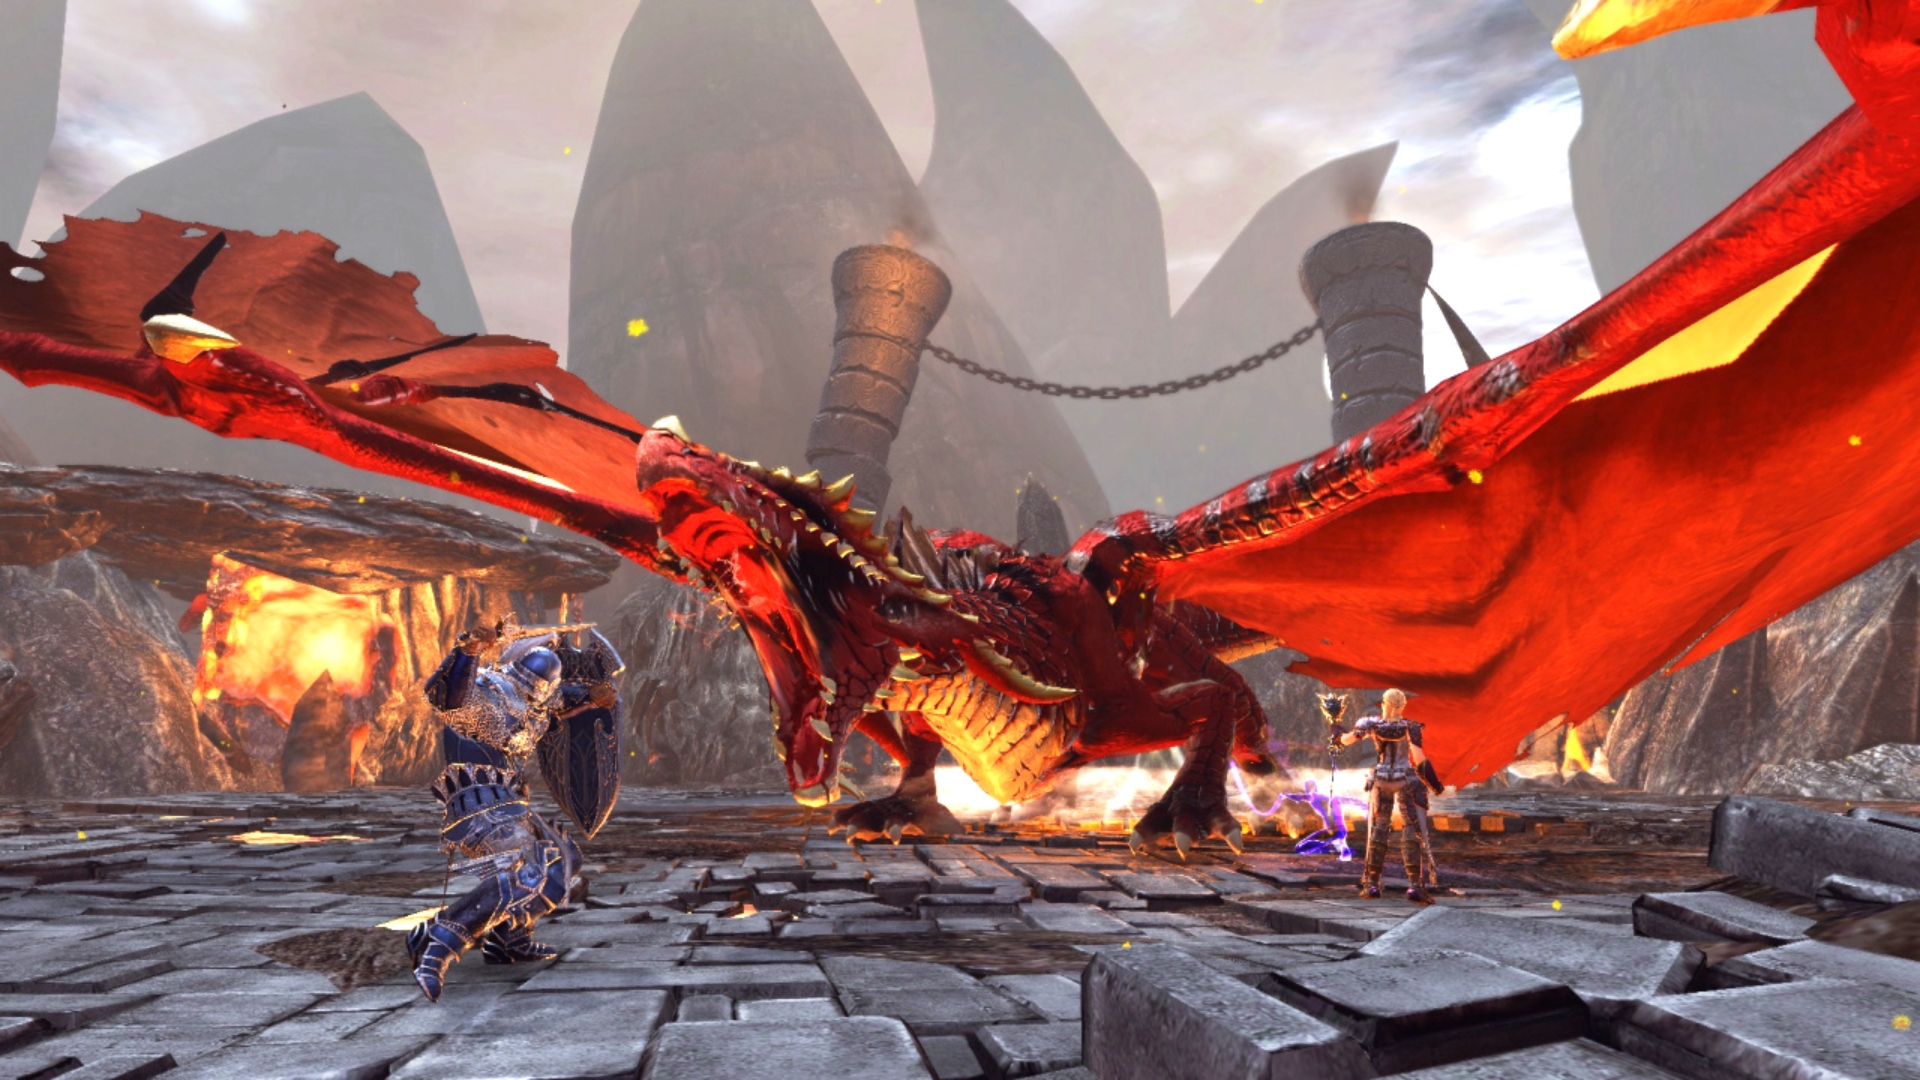 Best dragon games: Neverwinter. Image shows a fight with a red dragon.